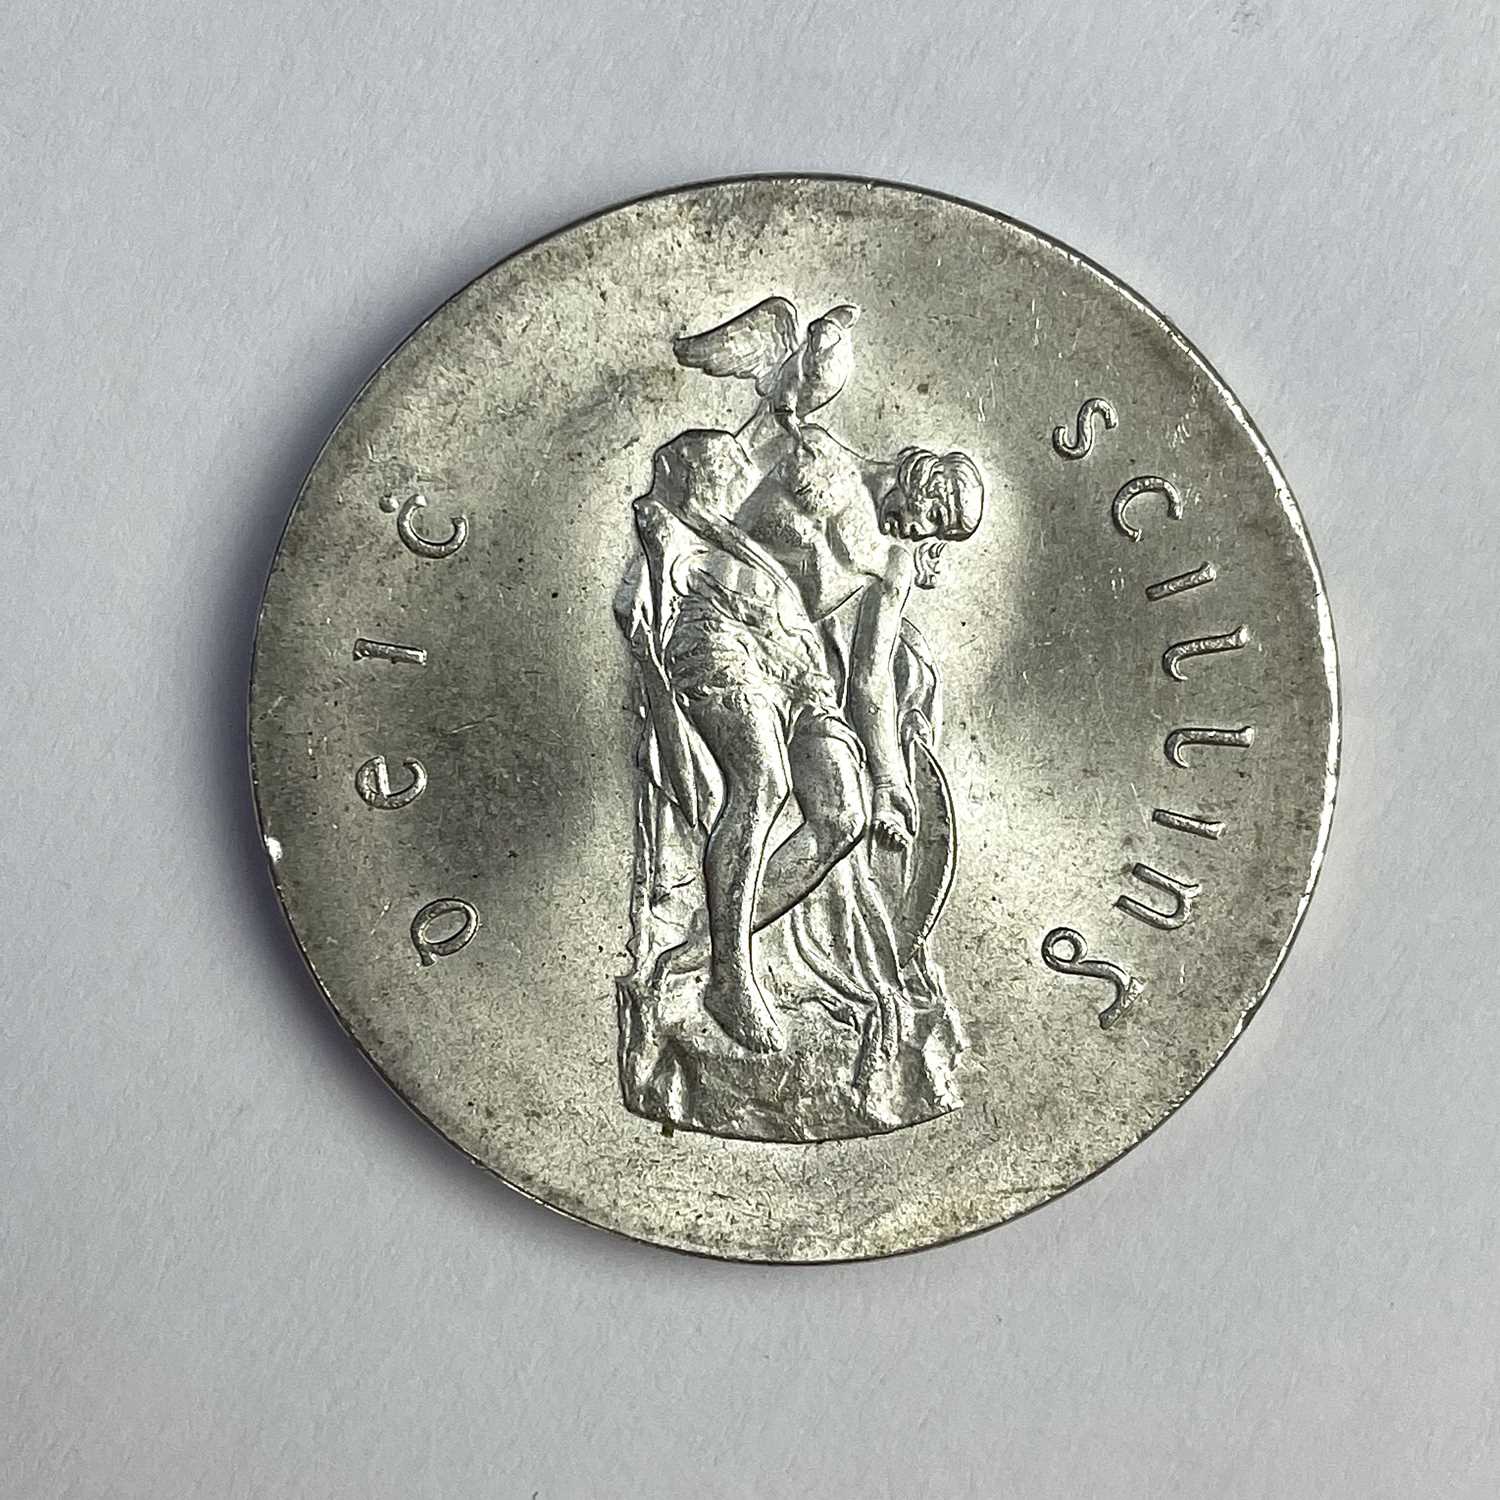 Lot 655 - A 1966 Irish silver shilling coin, weight 18.17g.